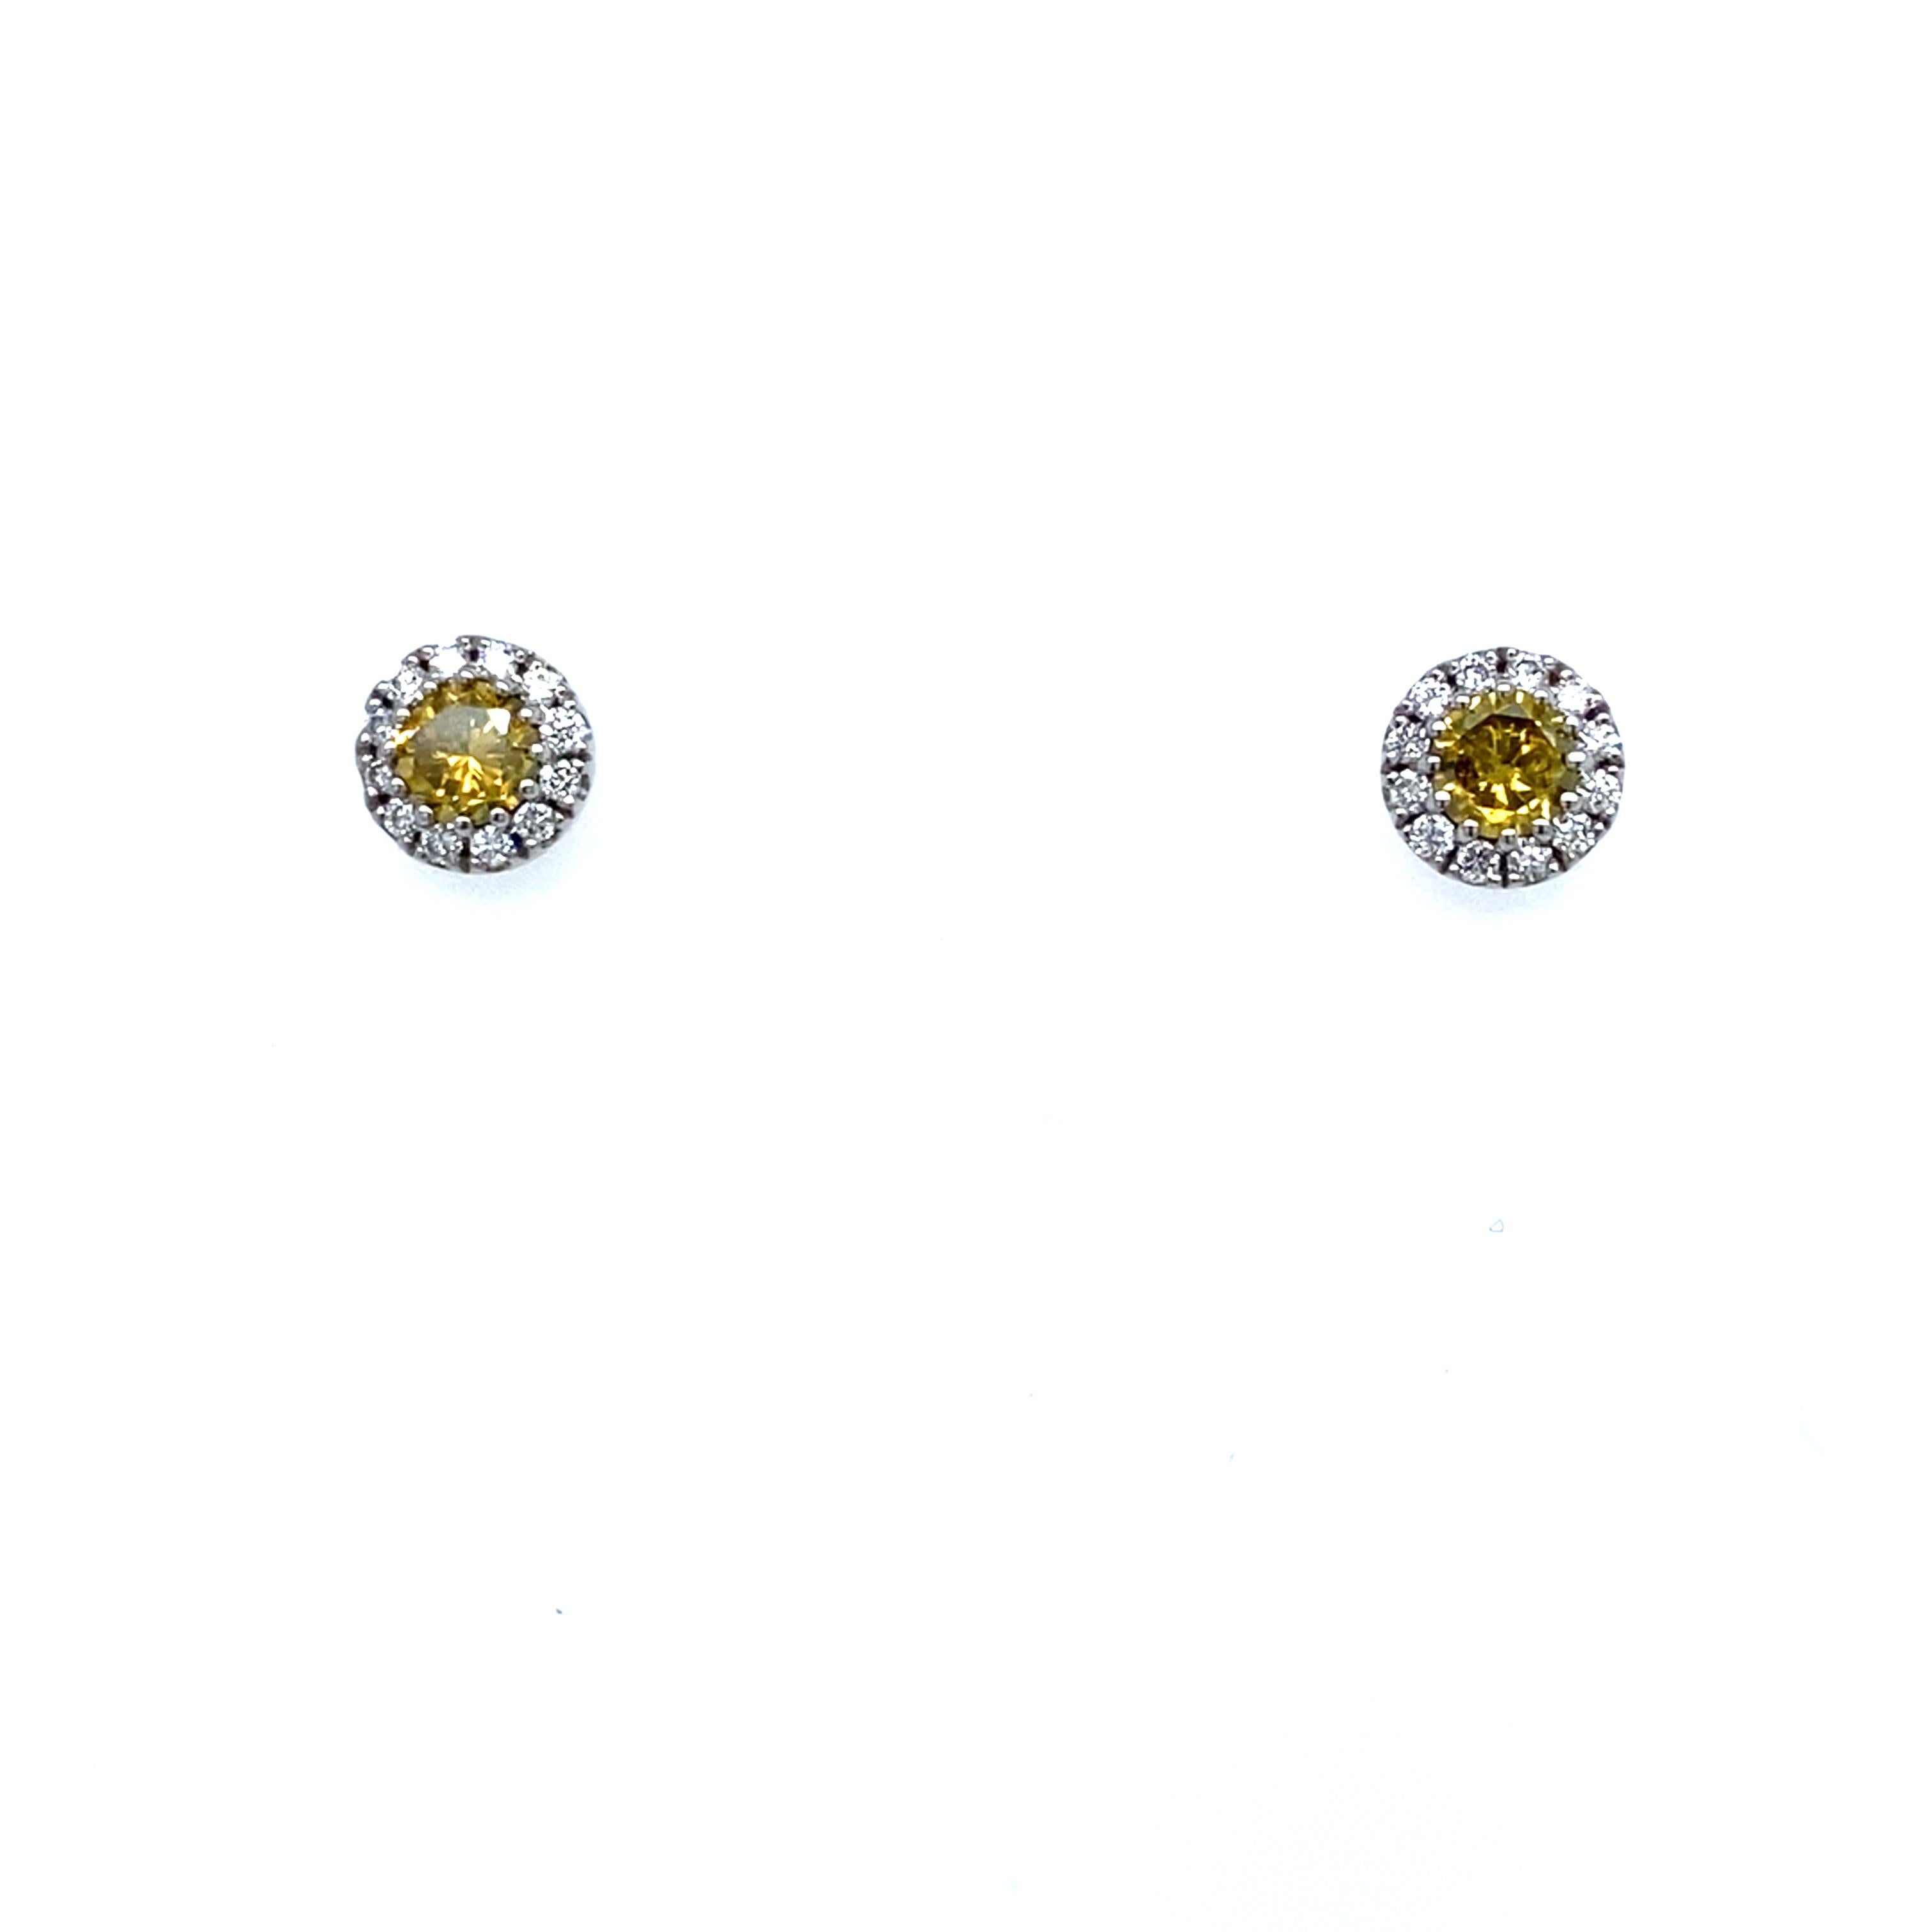 Round Cut Intense Yellow Diamond Earrings Surrounded by 0.16ct G/VS White Diamonds For Sale